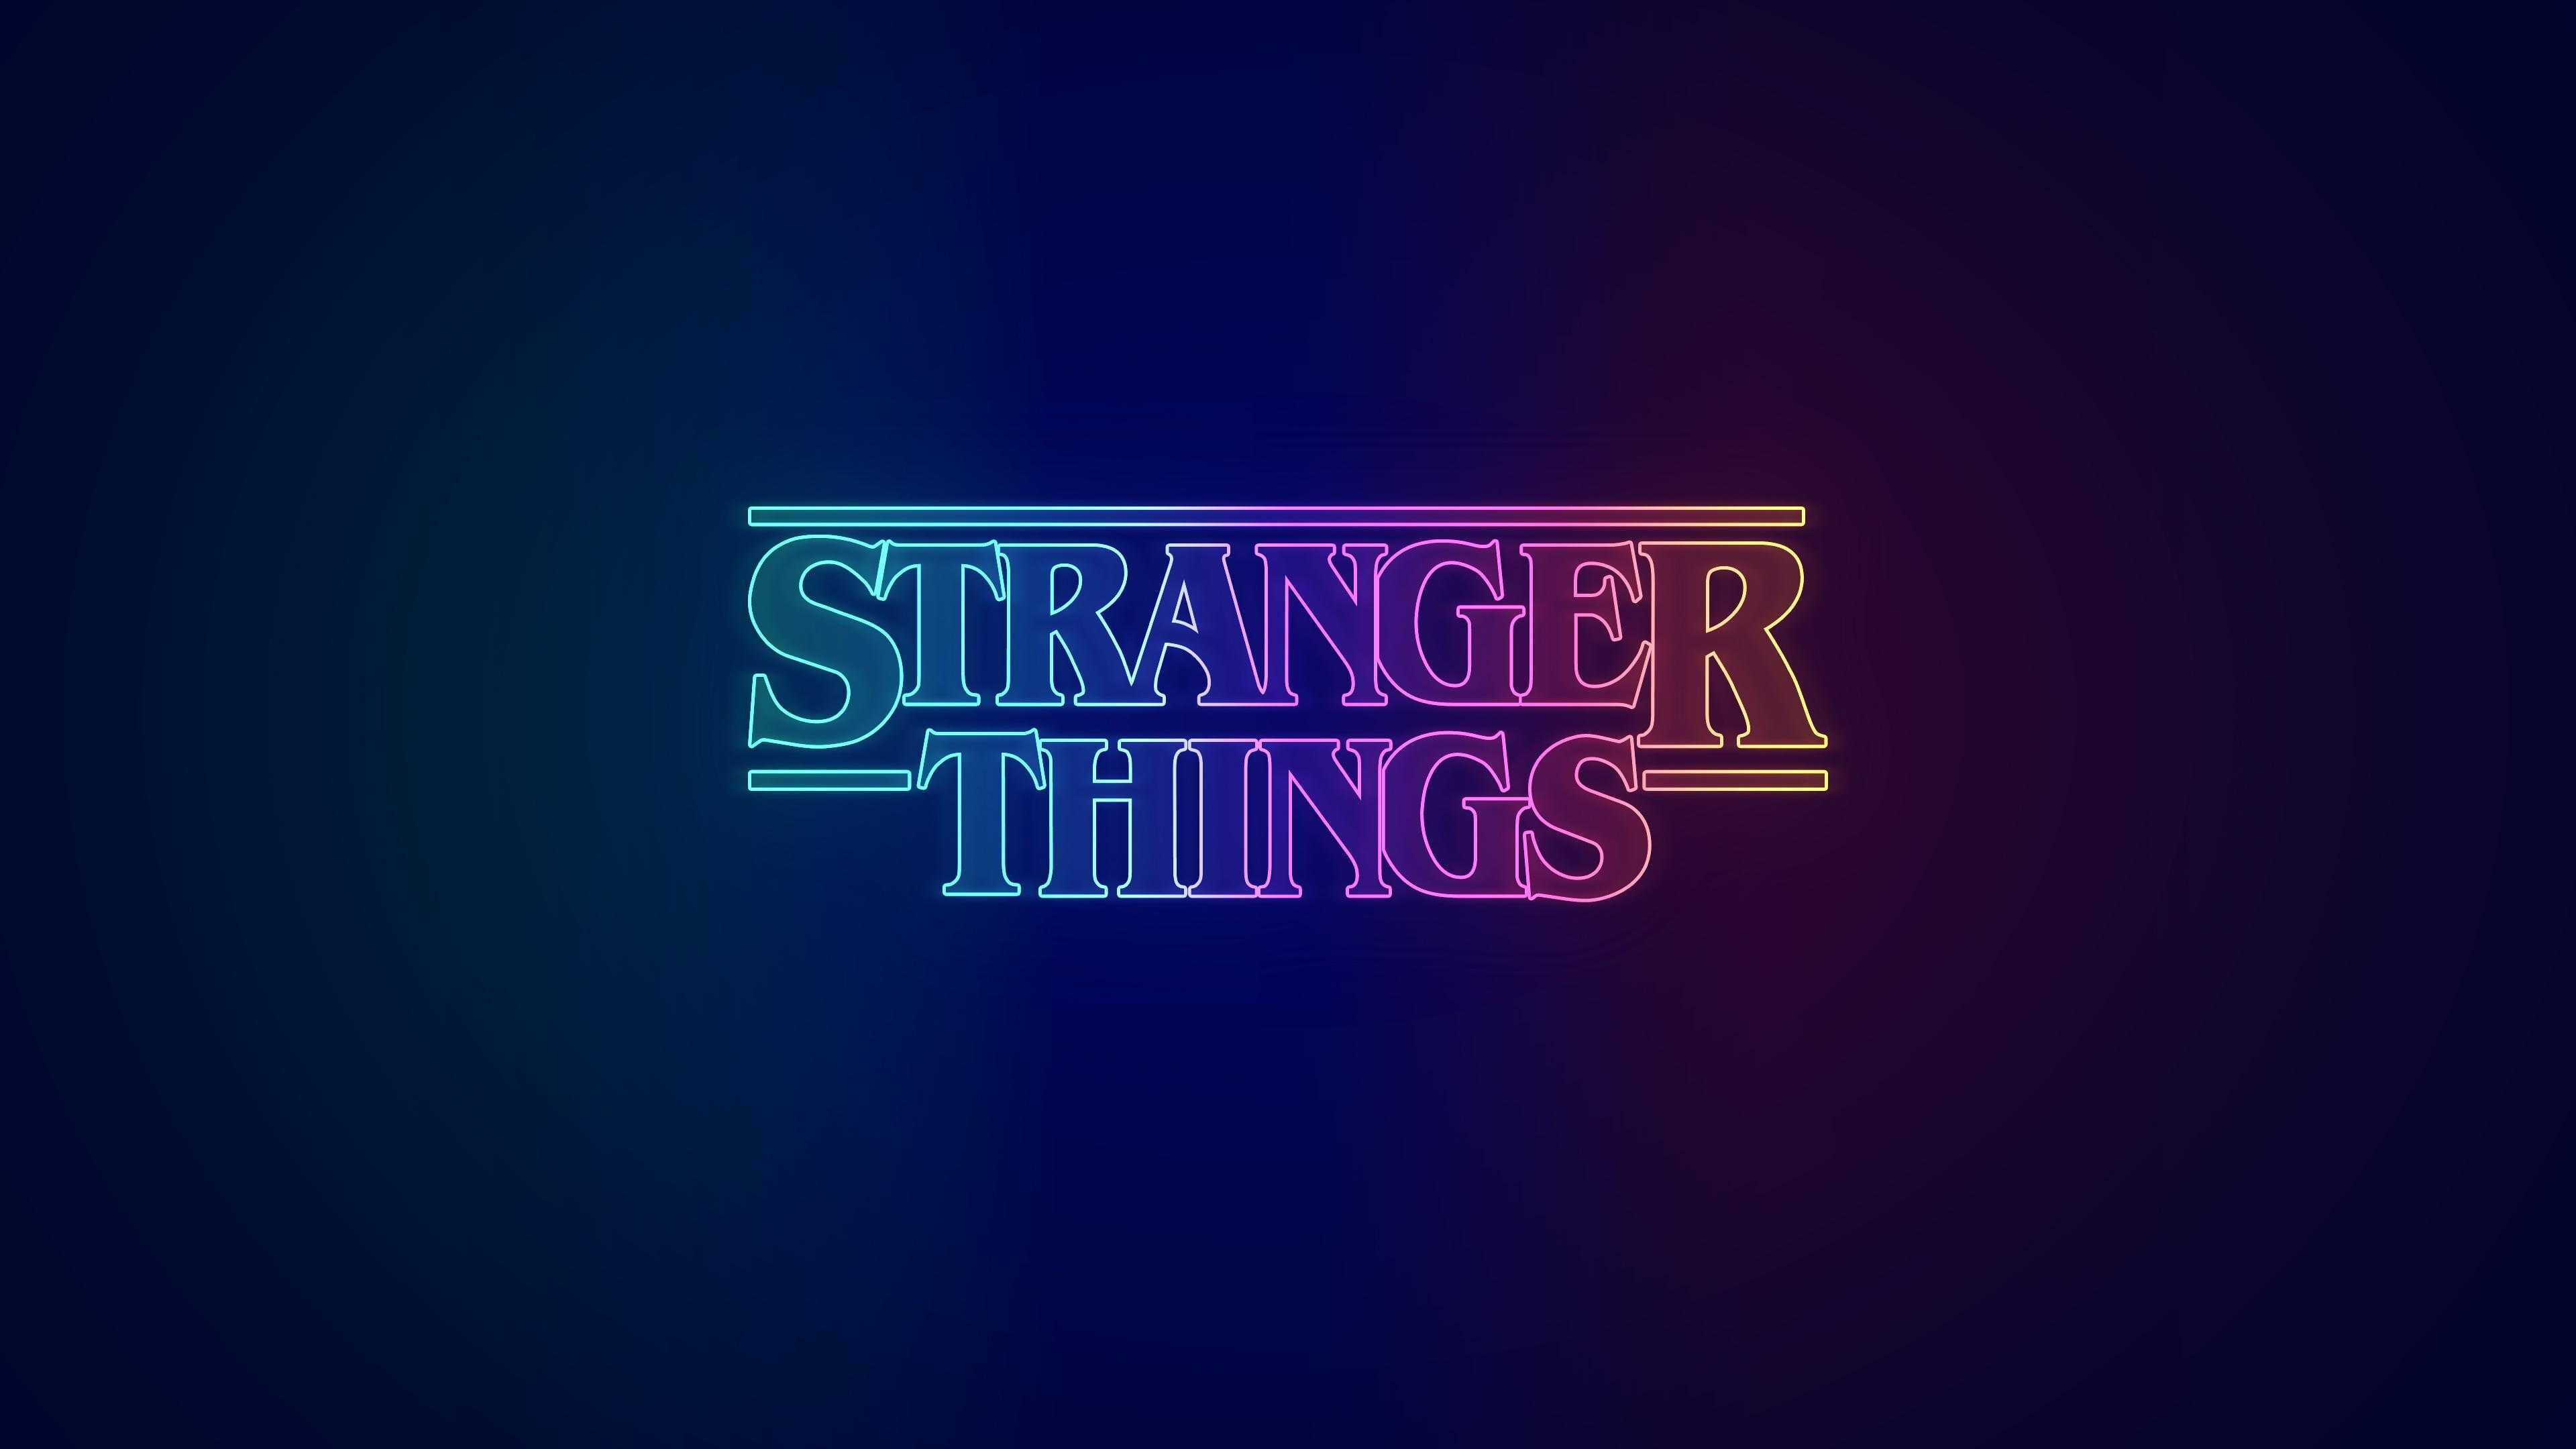 Stranger Things: An American science fiction horror drama television series. 3840x2160 4K Background.